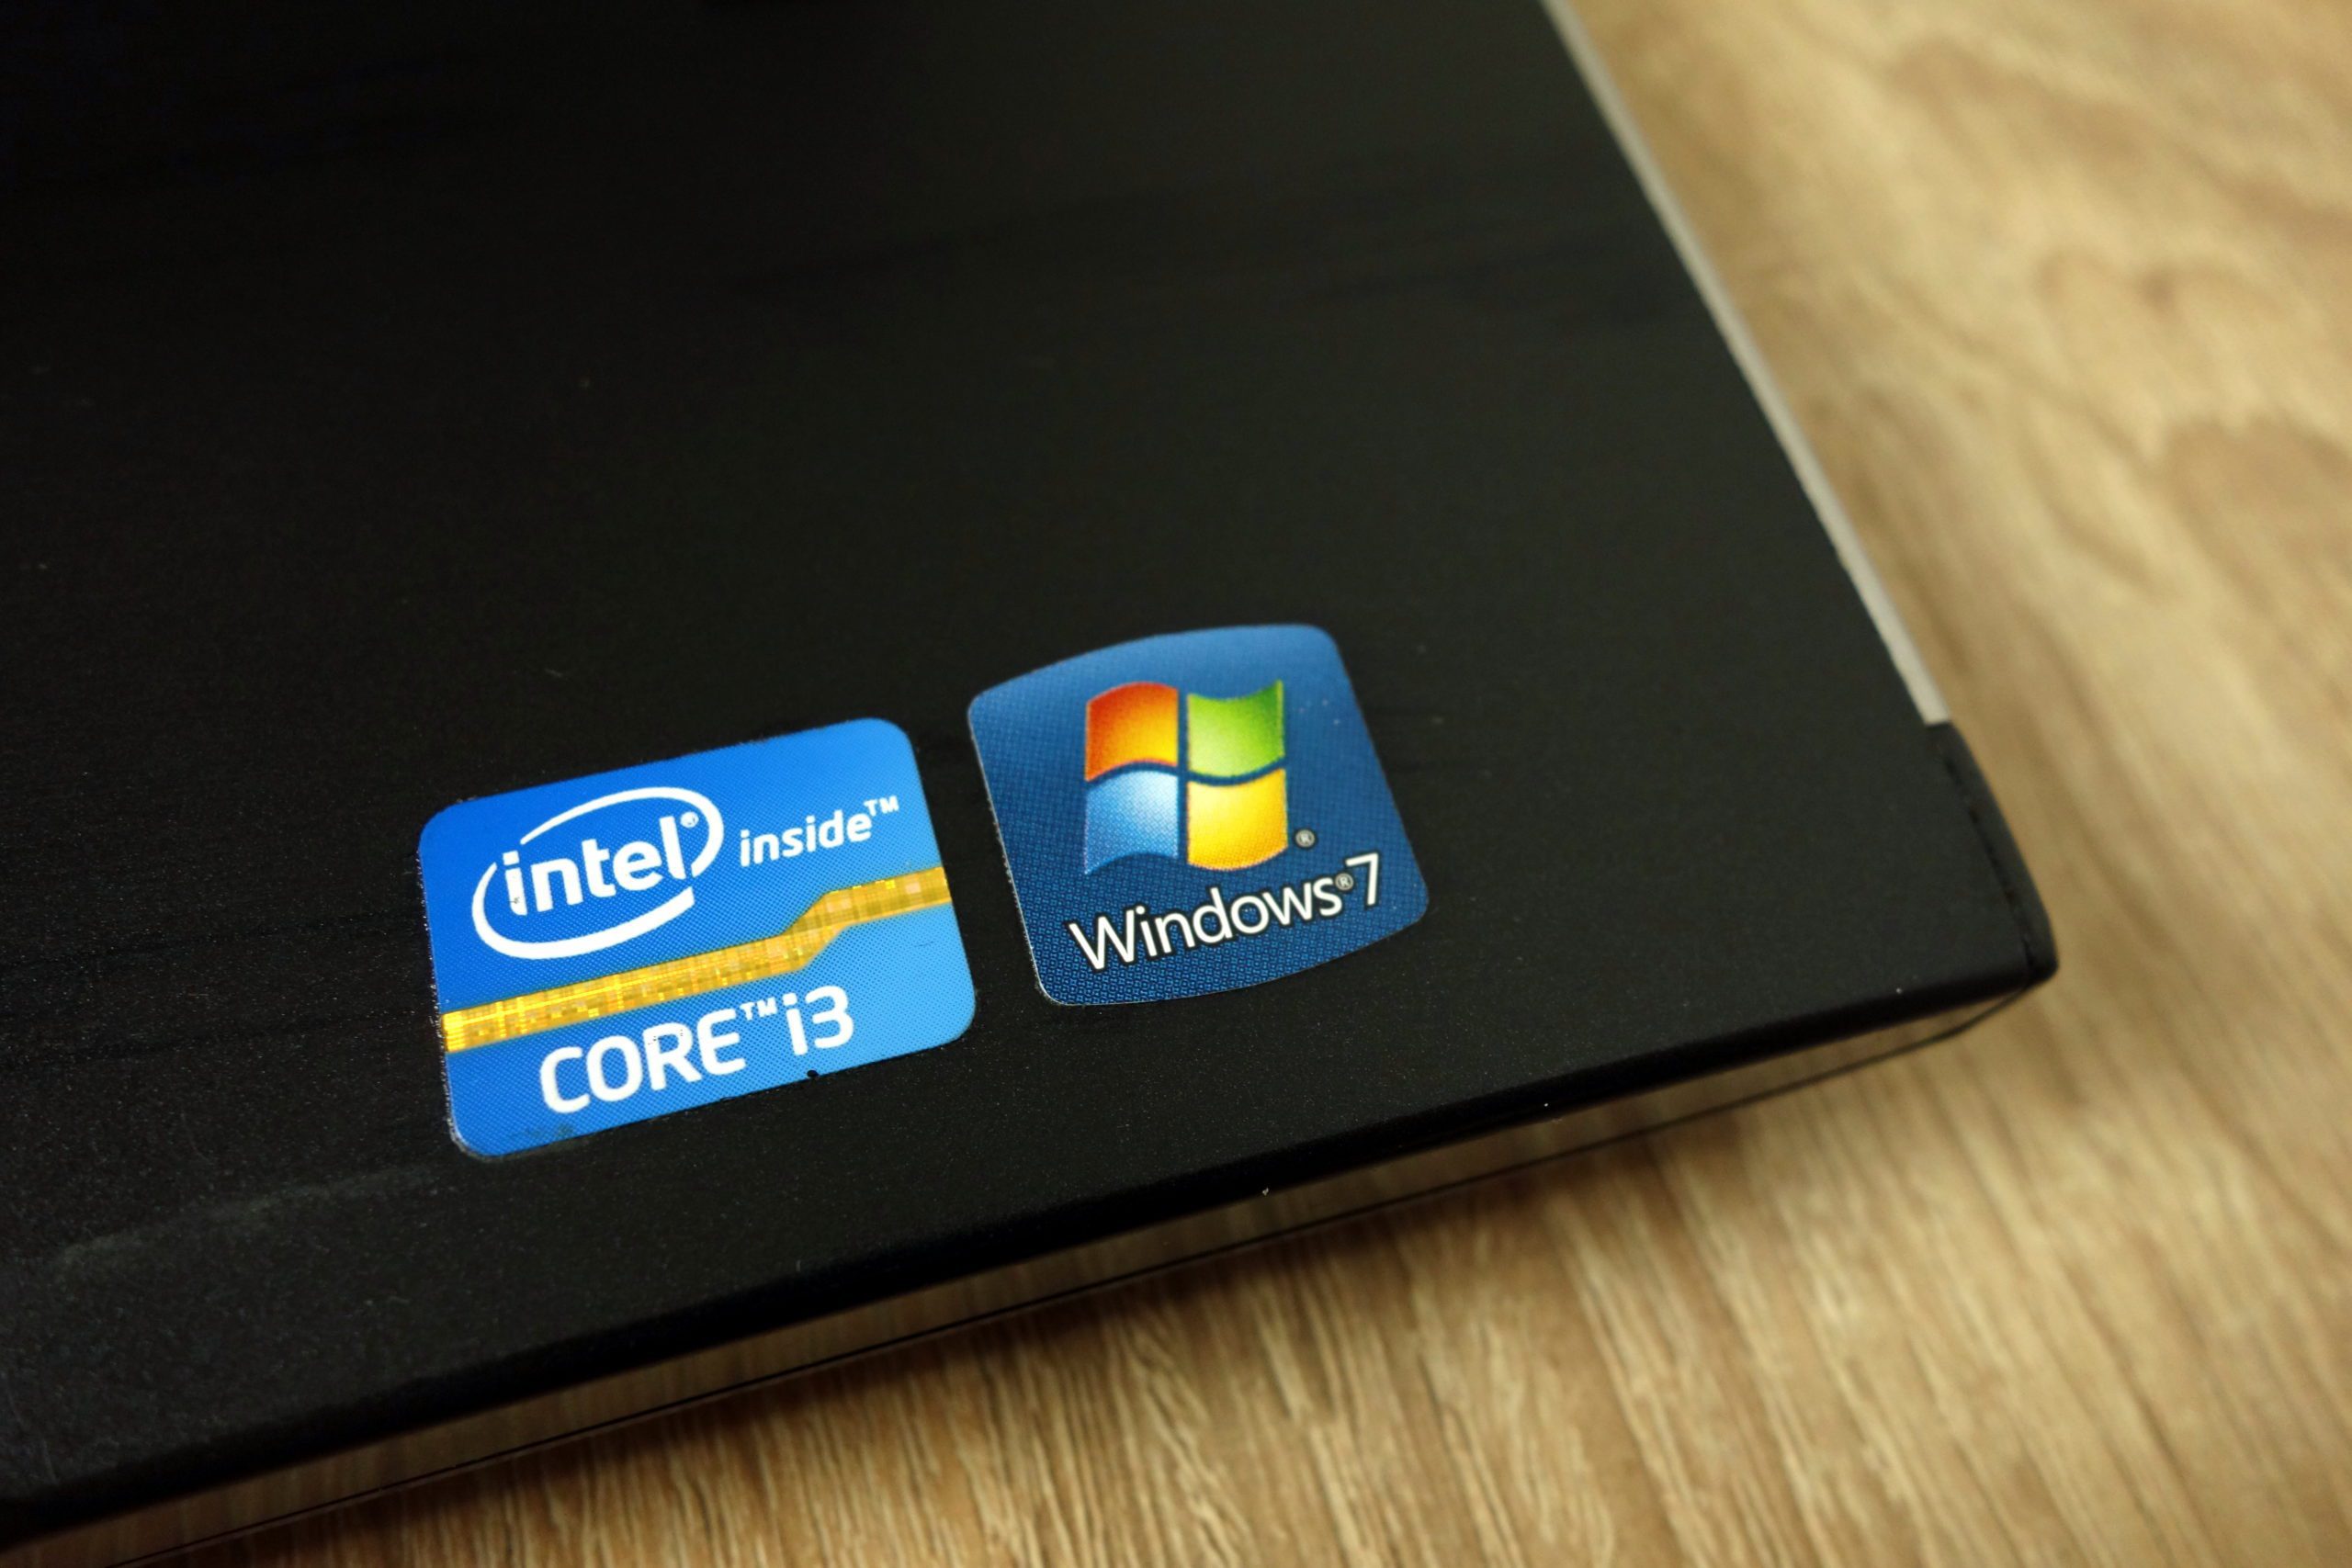 Support is Ending for Windows 7: What Does That Mean for You?